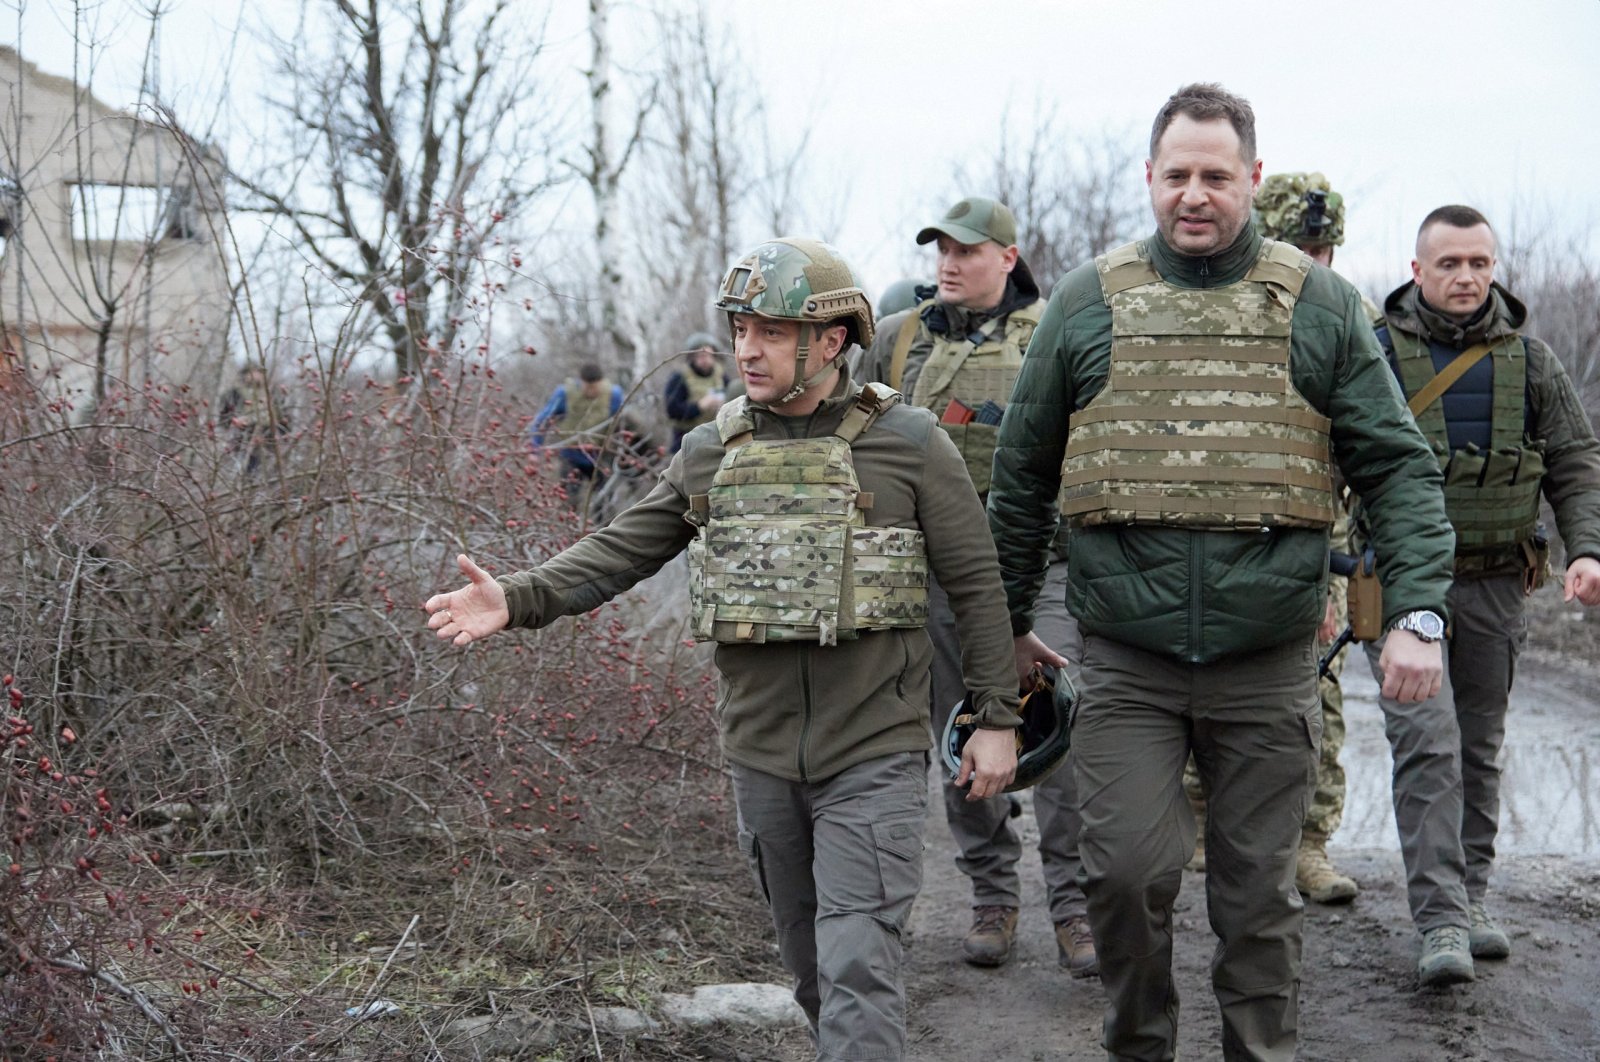 Ukrainian President Volodymyr Zelenskiy visits combat positions of the country&#039;s armed forces near the line of separation from Russian-backed rebels in the Donetsk region, Ukraine, Feb. 17, 2022. (REUTERS)